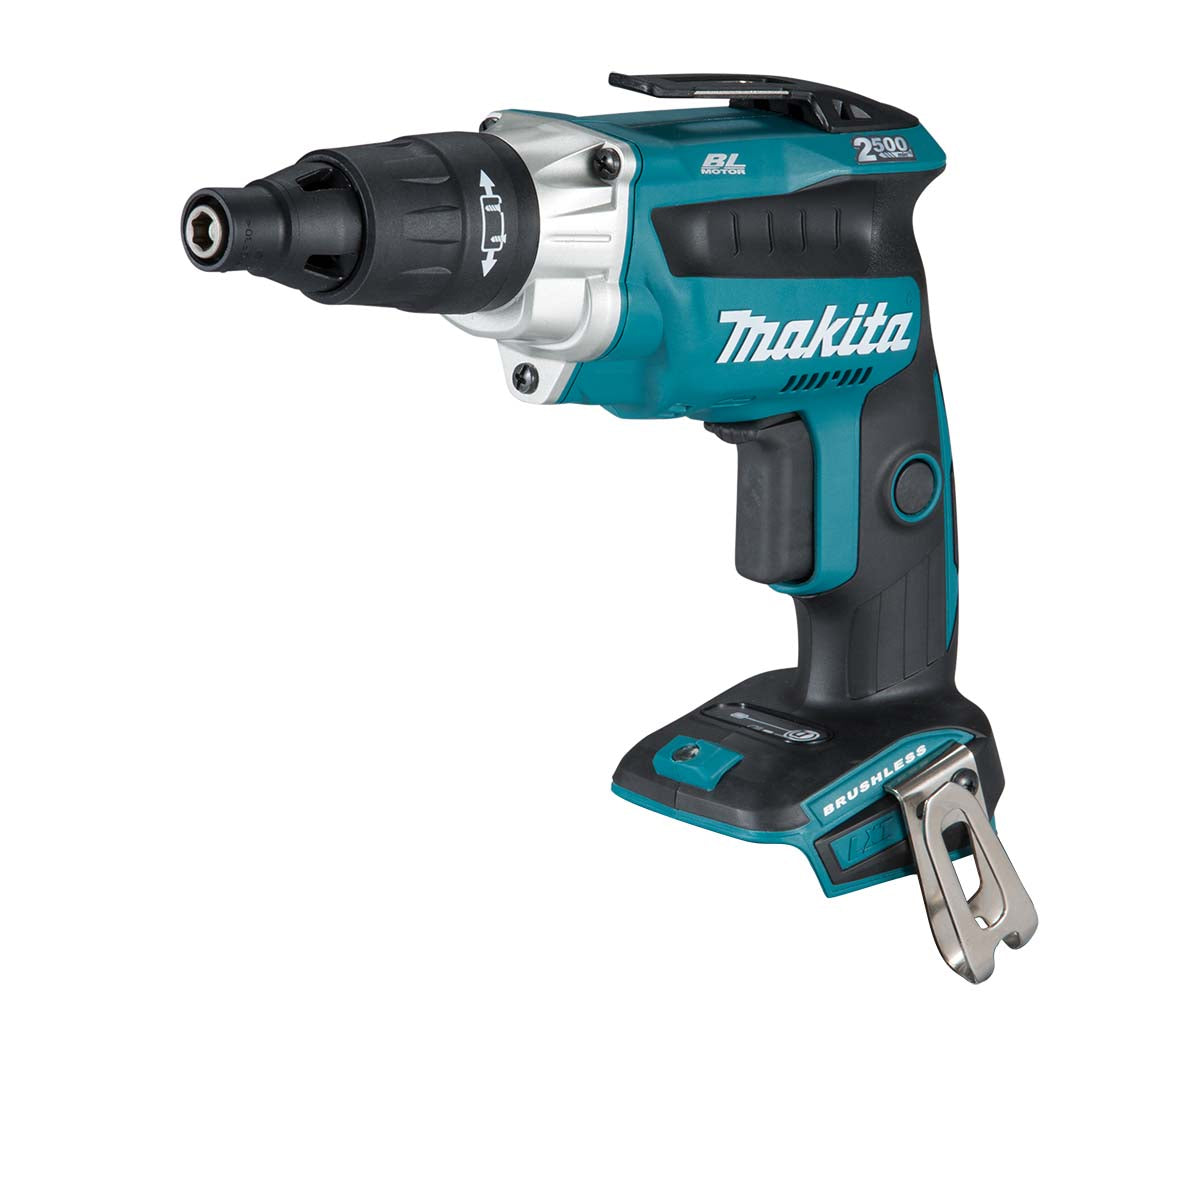 18V Brushless High Torque 5/16" Hex Drive Screwdriver Bare (Tool Only) DFS251Z by Makita